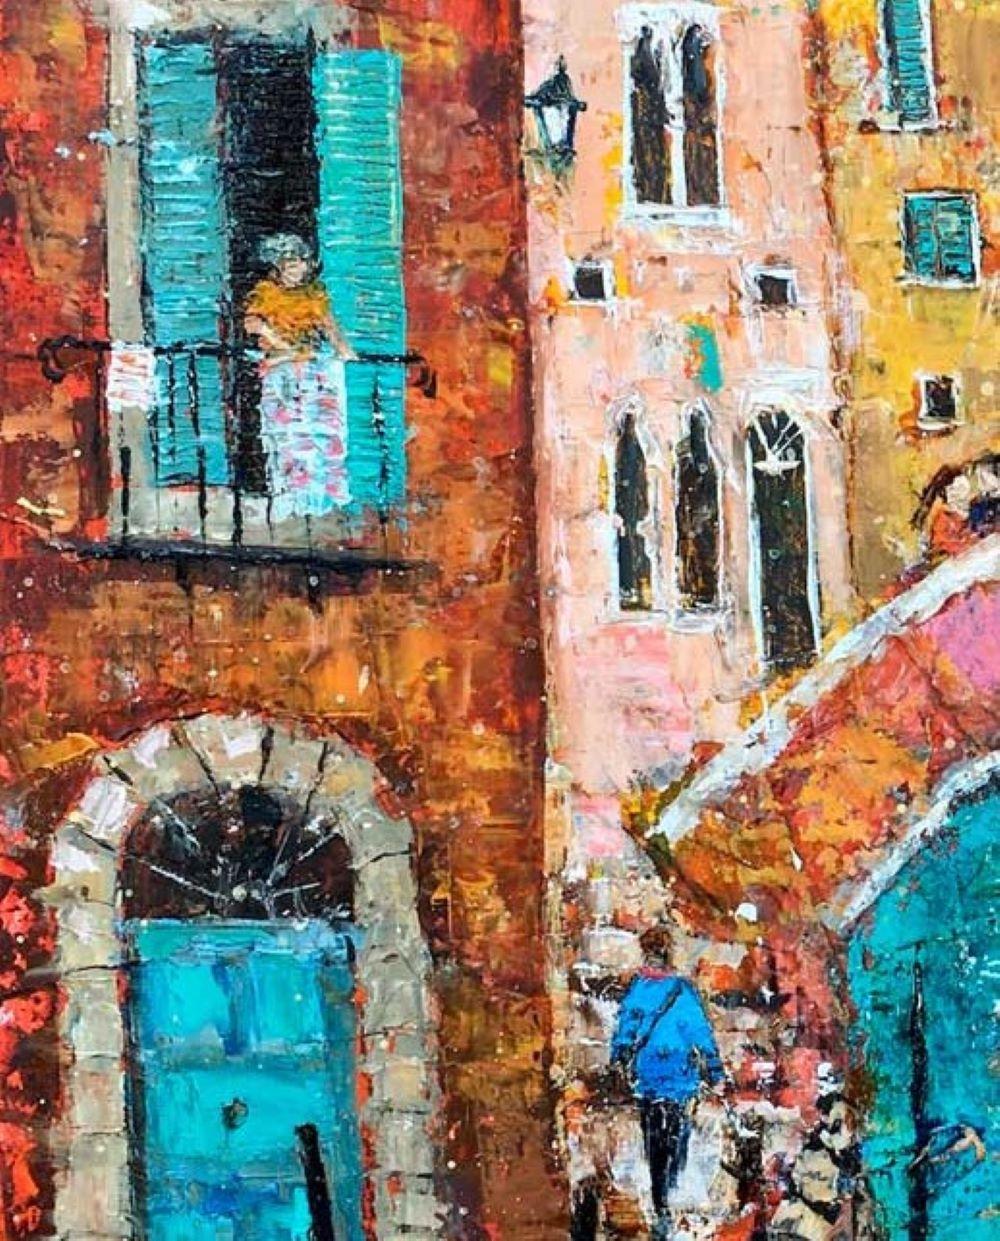 Entirely self-taught, Ellie is mainly known for her vibrantly coloured townscapes, though in recent years, she has gone on to develop her art to include more figurative work, focusing on the horse in particular.
Ellie uses a variety of different